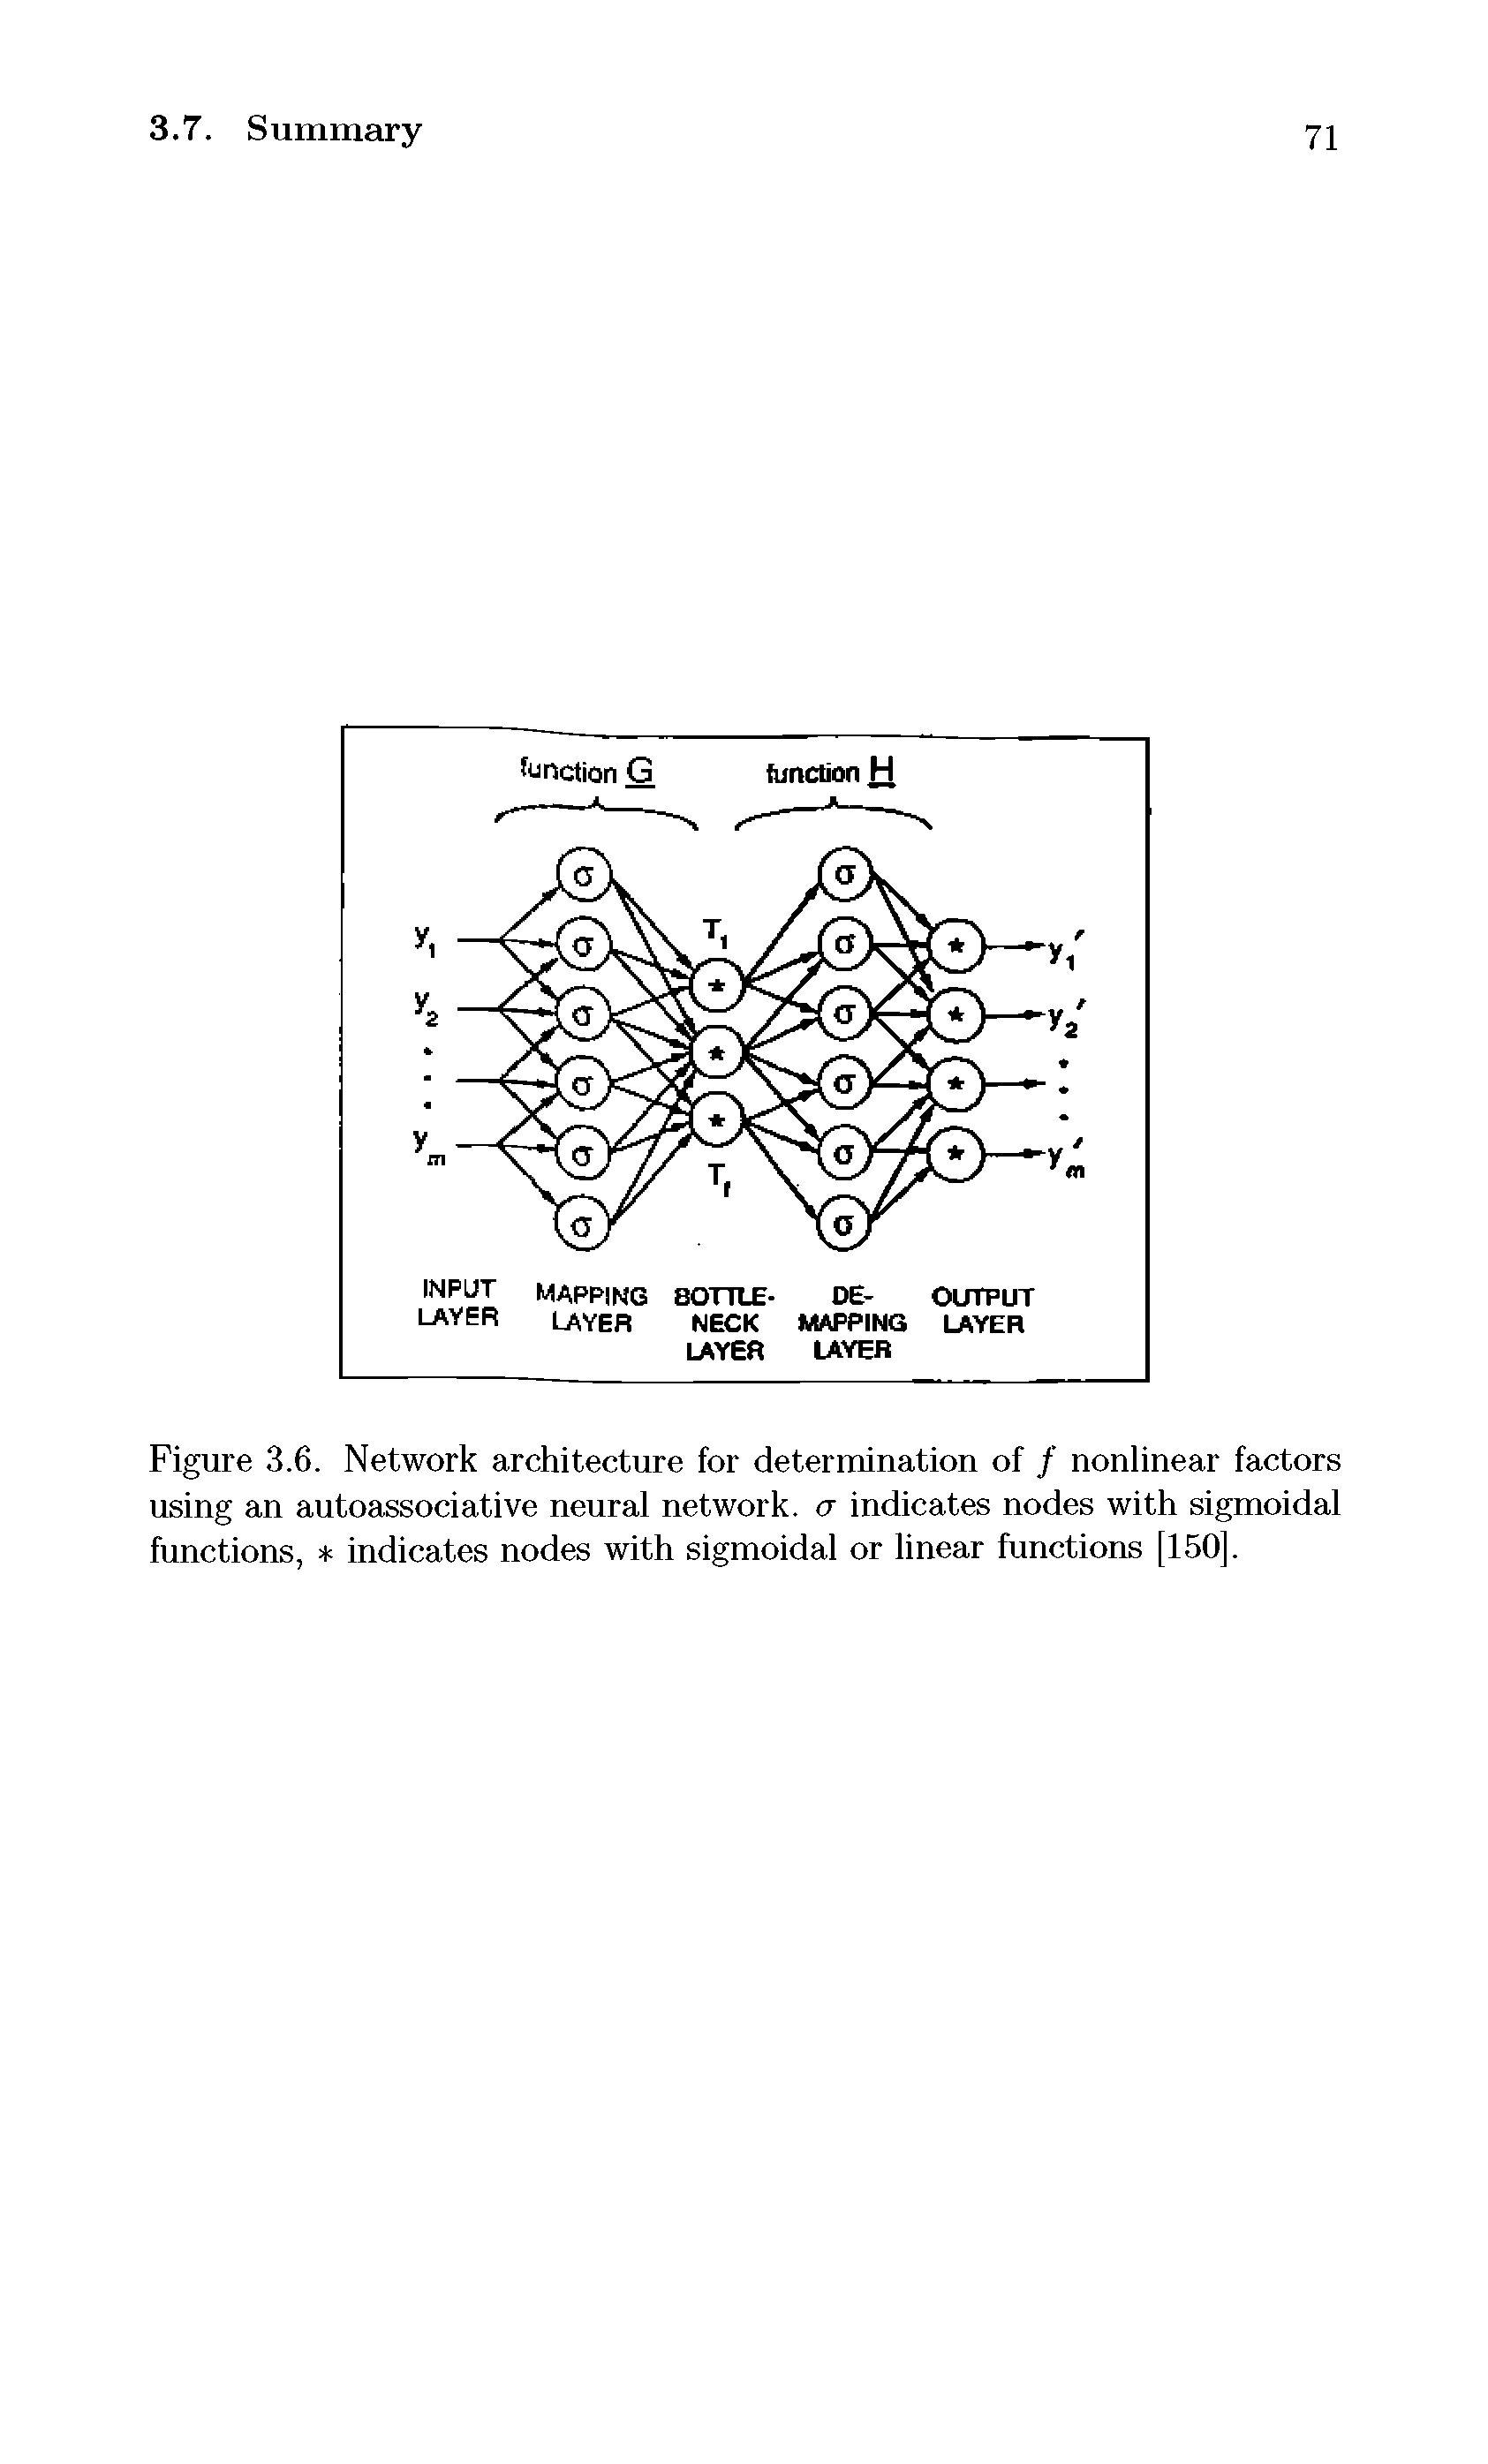 Figure 3.6. Network architecture for determination of / nonlinear factors using an autoassociative neural network, a indicates nodes with sigmoidal functions, indicates nodes with sigmoidal or linear functions [150].